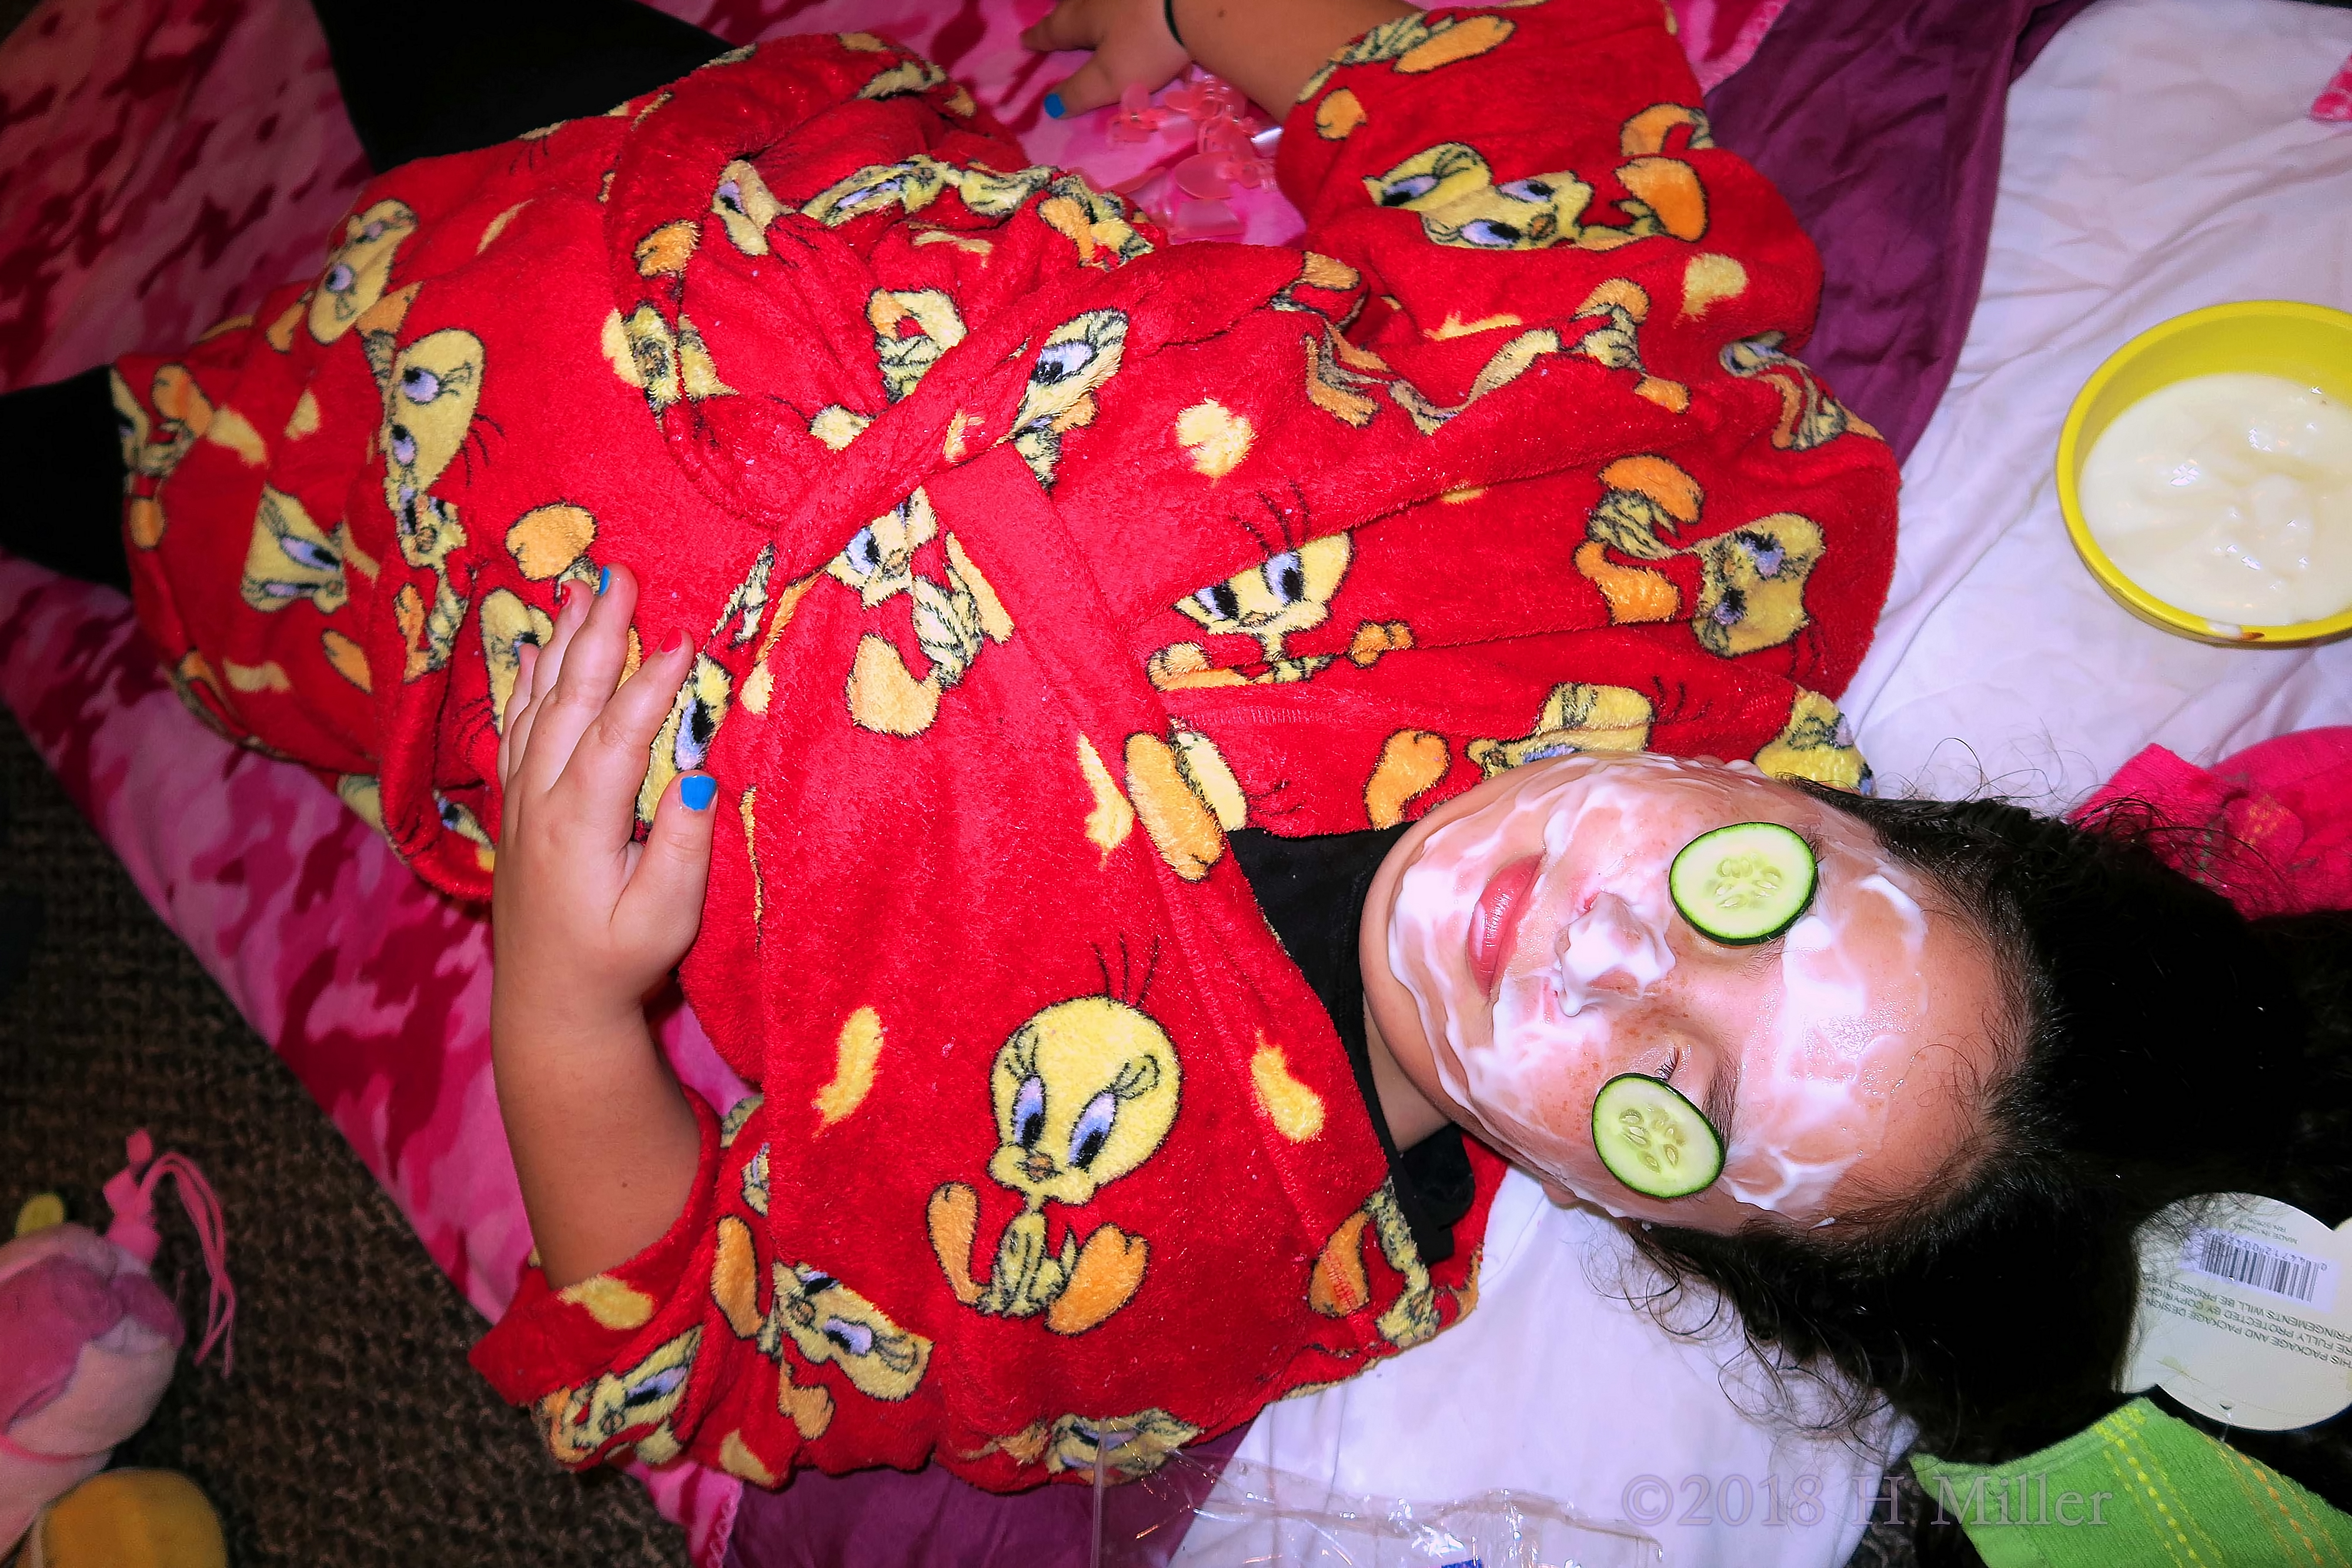 With The Masque And Slice Of Cukes, She Is Enjoying The Kids Facial!